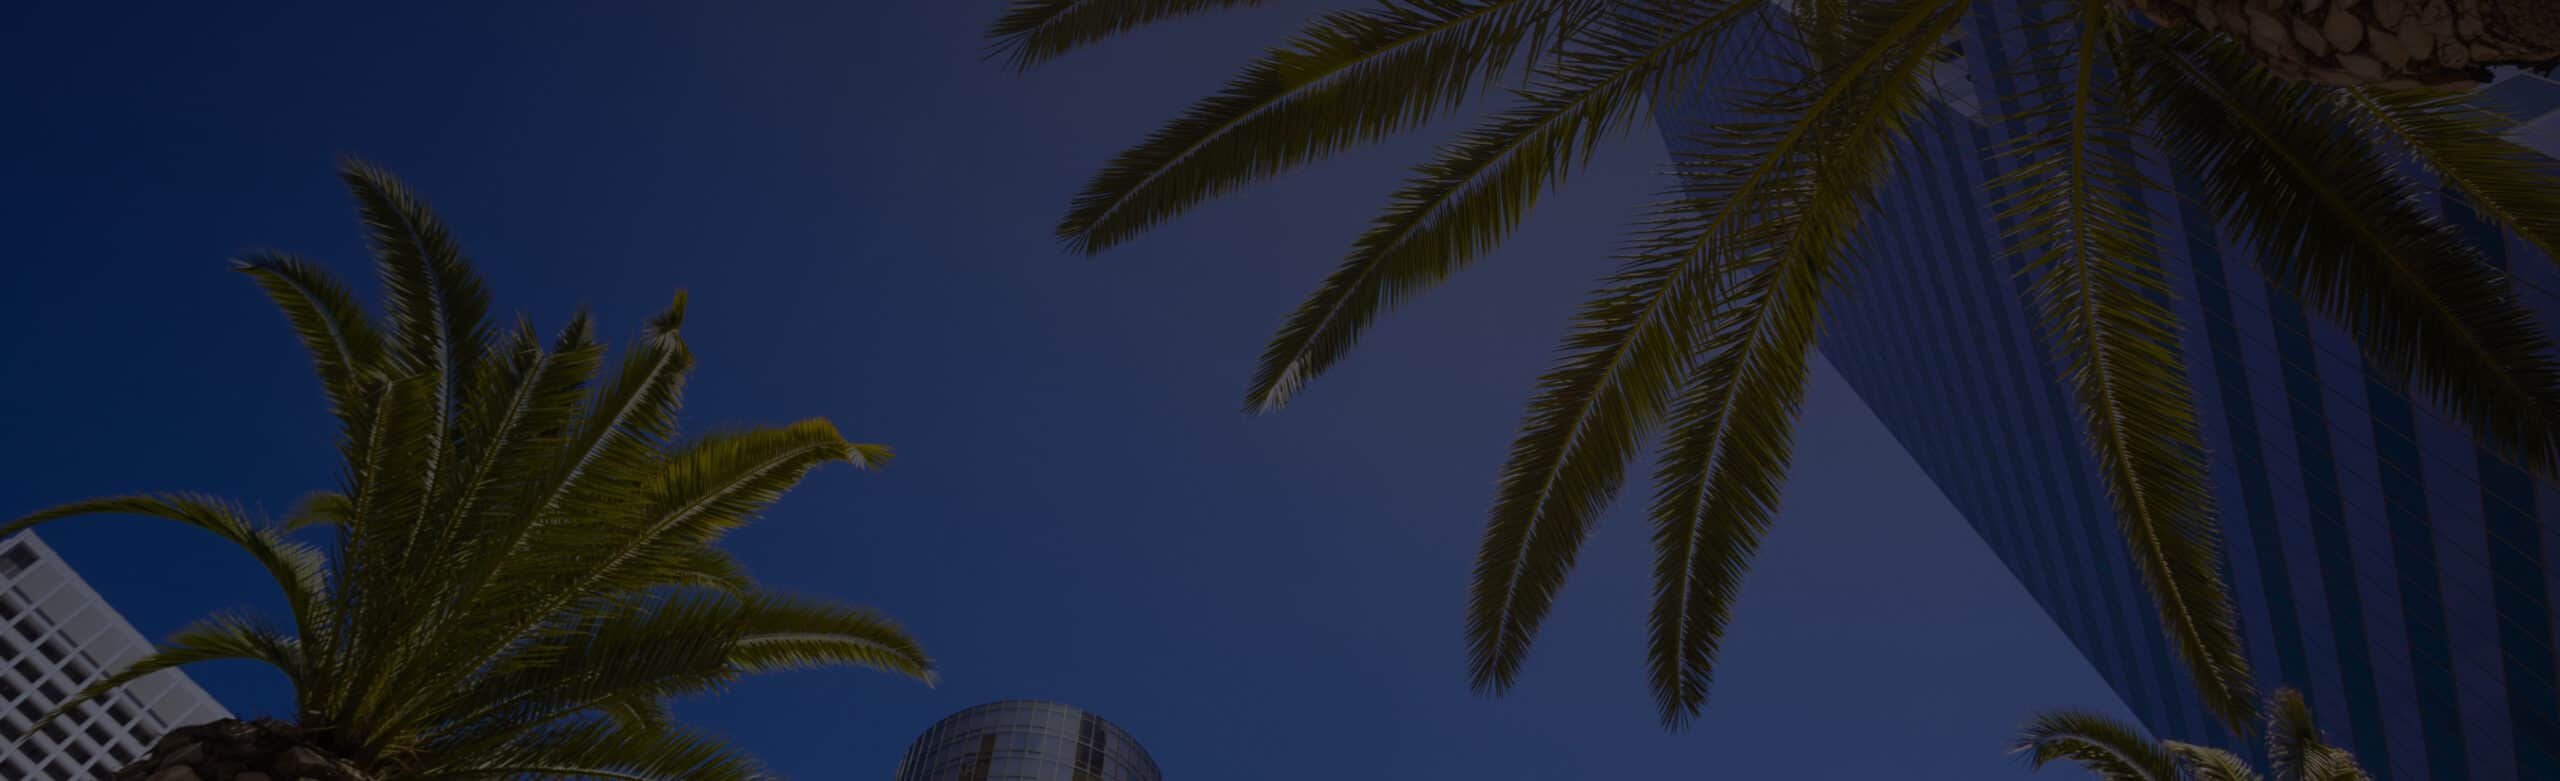 sky with palm trees and buildings